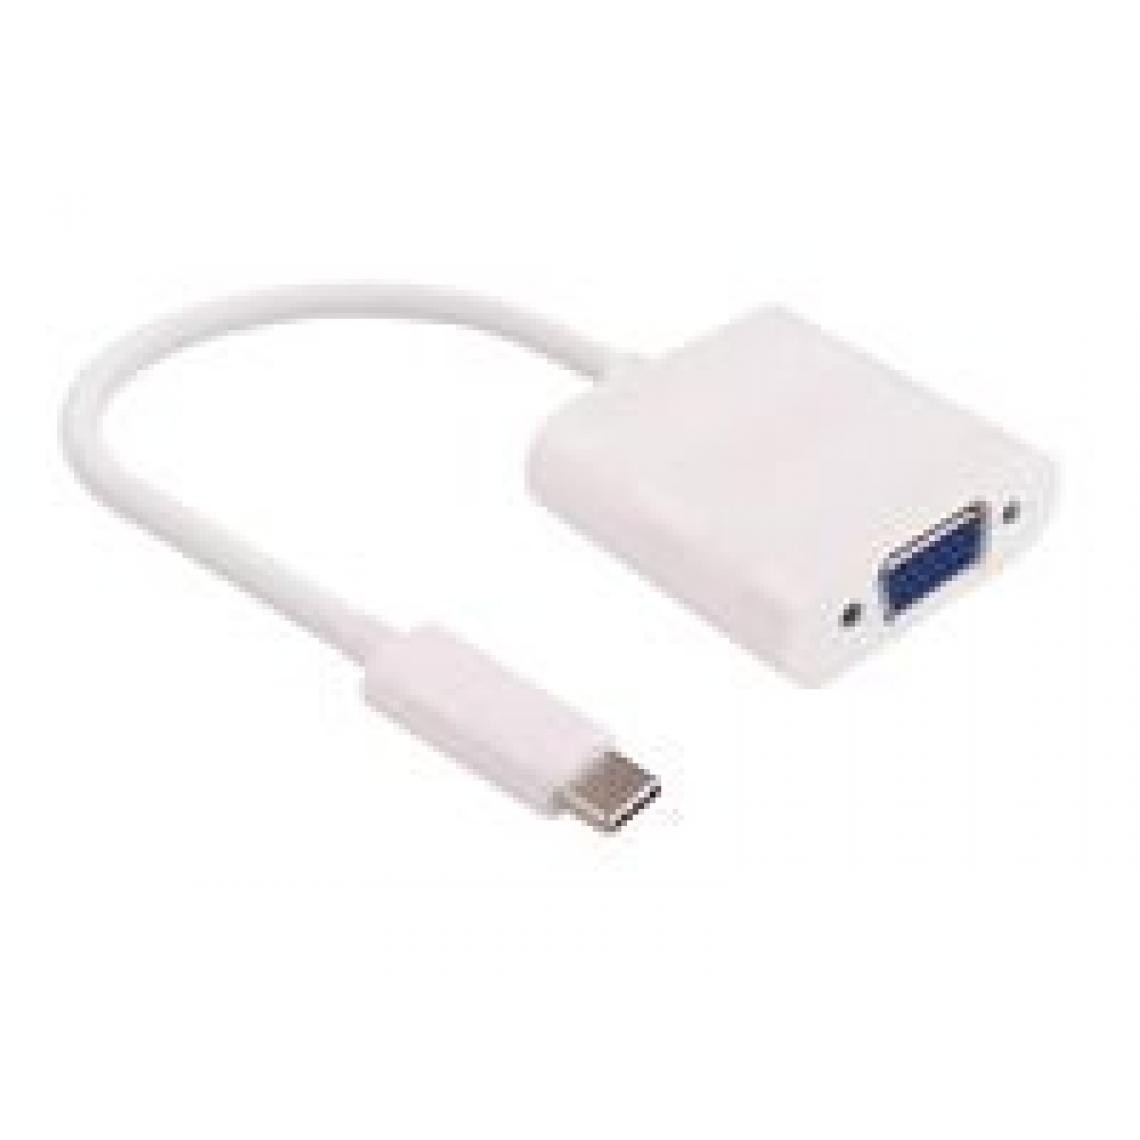 Disney Montres - USB3.1 C - VGA ADAPTER White Max. 1920x1080p@60Hz 0,2m, White - accessoires cables meubles supports